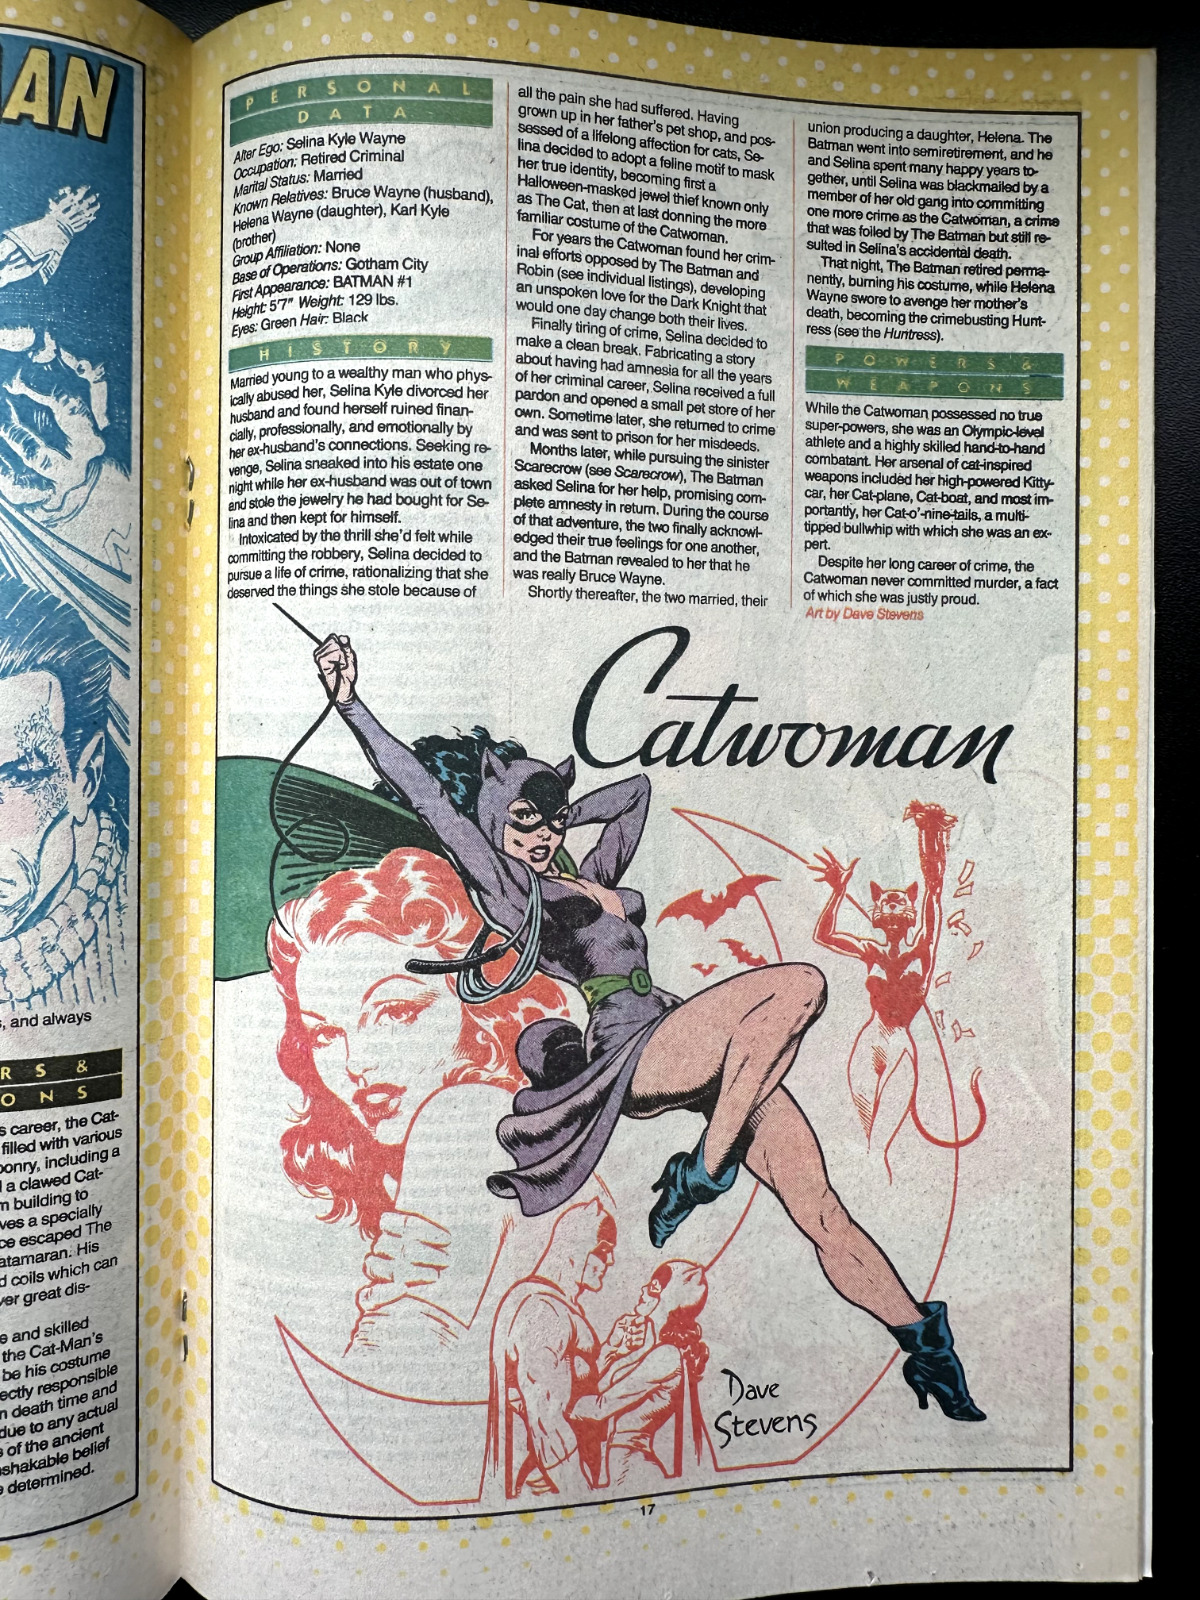 Who's Who #4 (NM- 9.2) Dave Stevens Catwoman Interior Art DC Directory June 1985